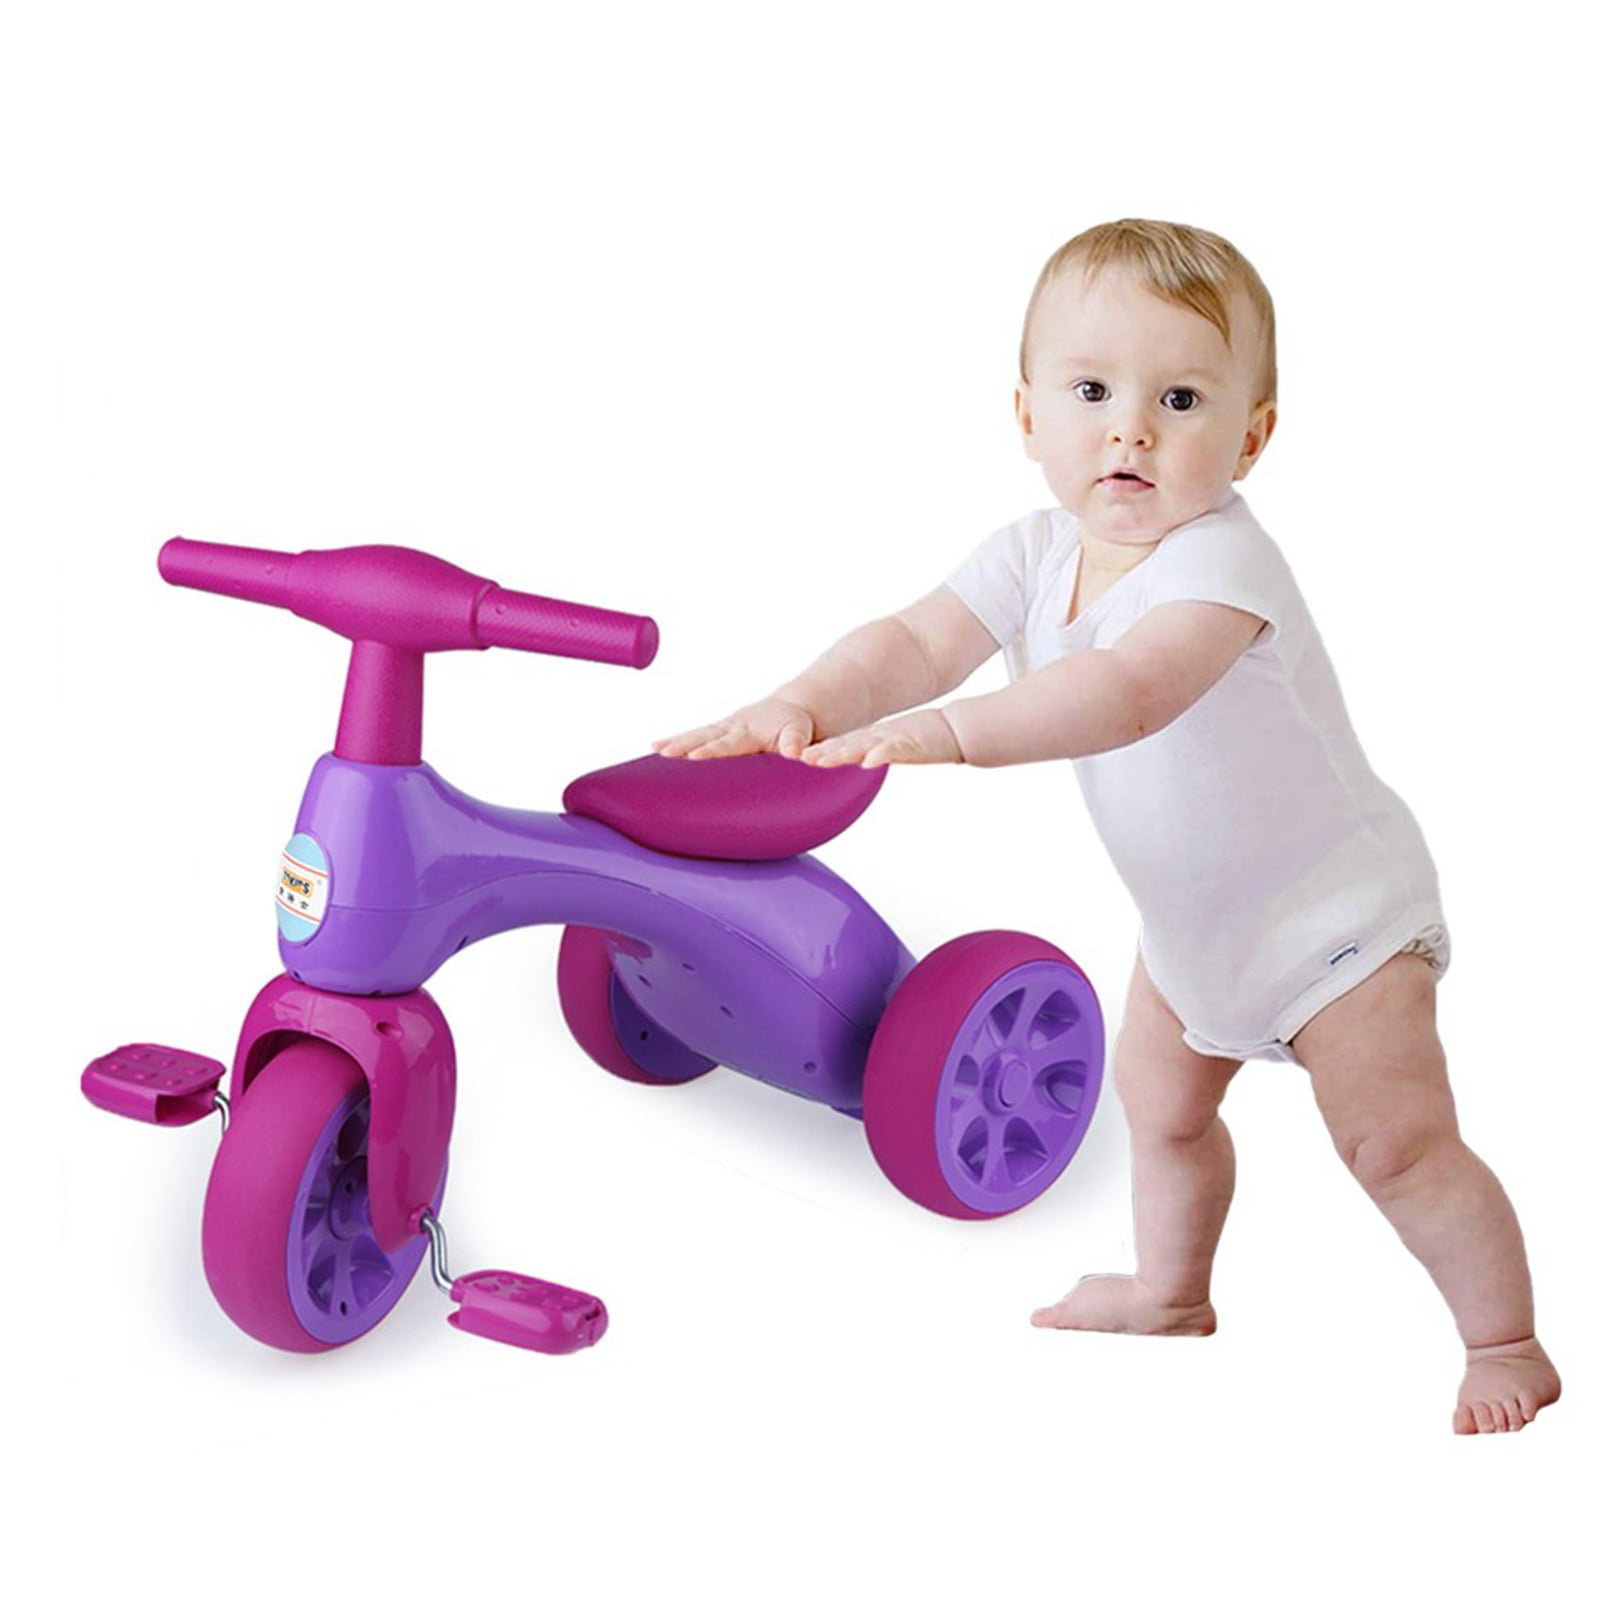 Indoor Outdoor Activity Tricycle Fun Gift for sale online Qaba Easy Ride on Toy Toddler Trike 